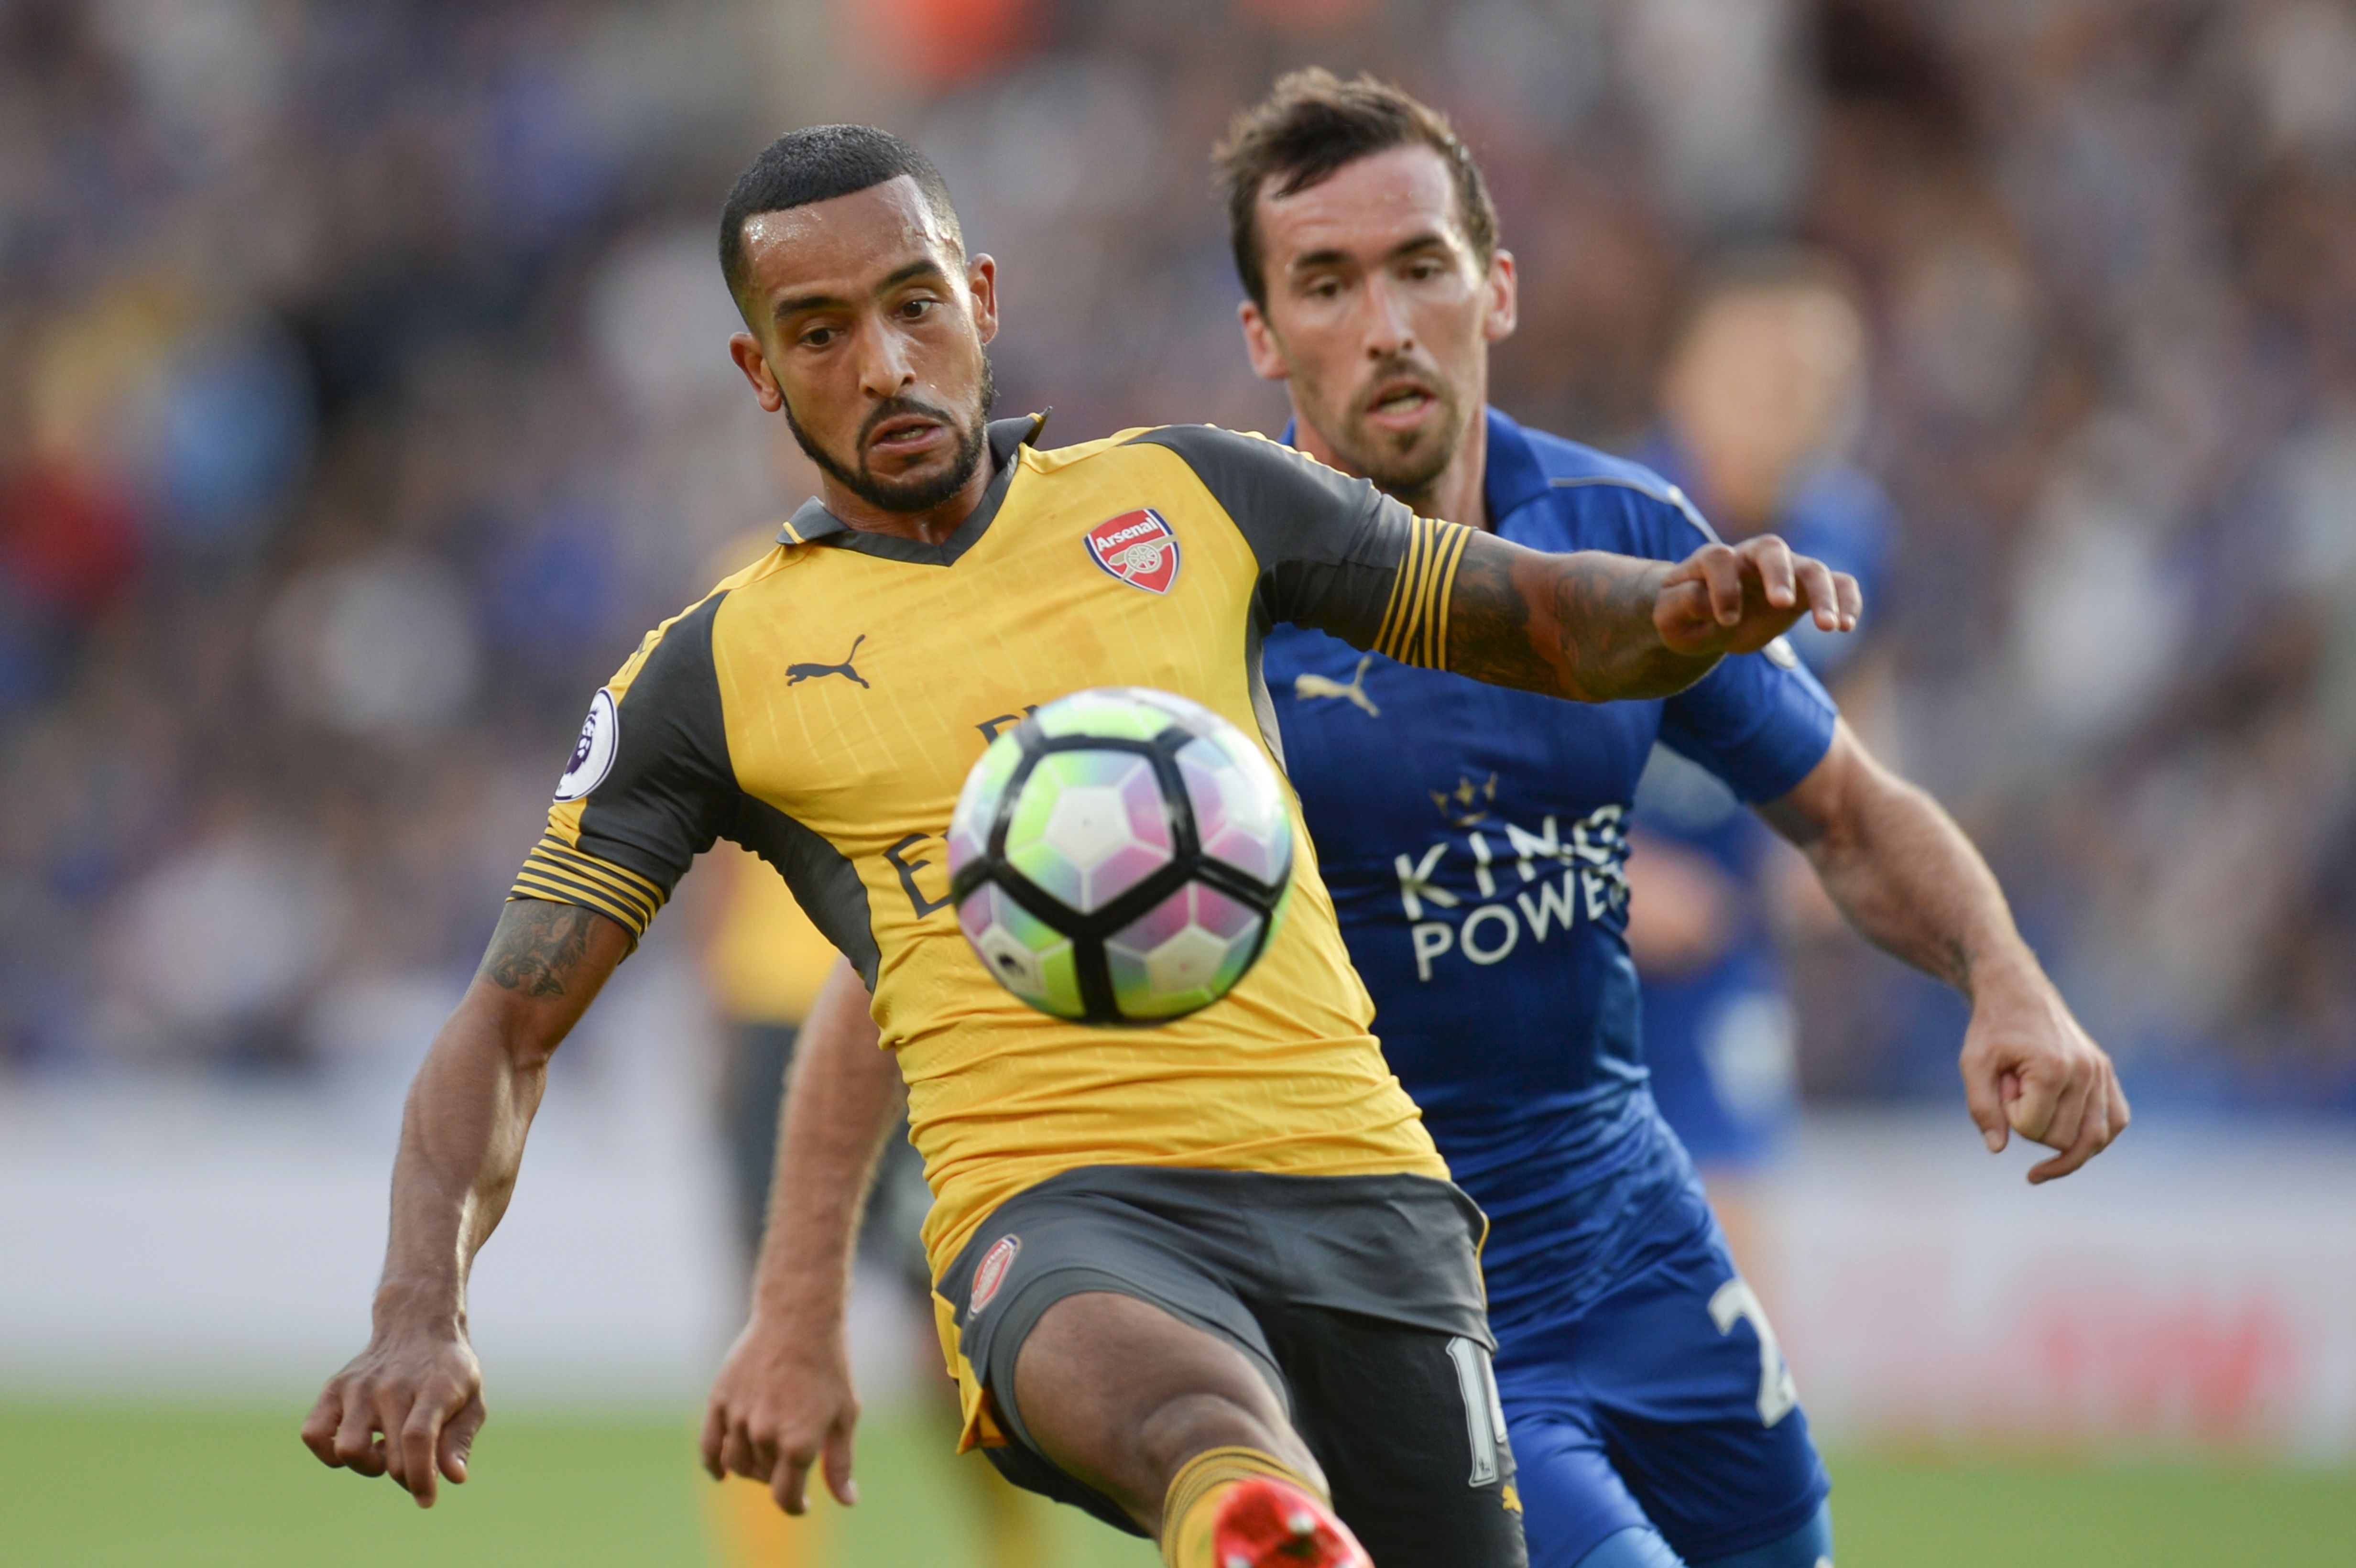 Arsenal's English midfielder Theo Walcott (L) tries to hold off Leicester City's Austrian defender Christian Fuchs (R) during the English Premier League football match between Leicester City and Arsenal at King Power Stadium in Leicester, central England on August 20, 2016.  (Photo credit: Oli Scarff/AFP/Getty Images)